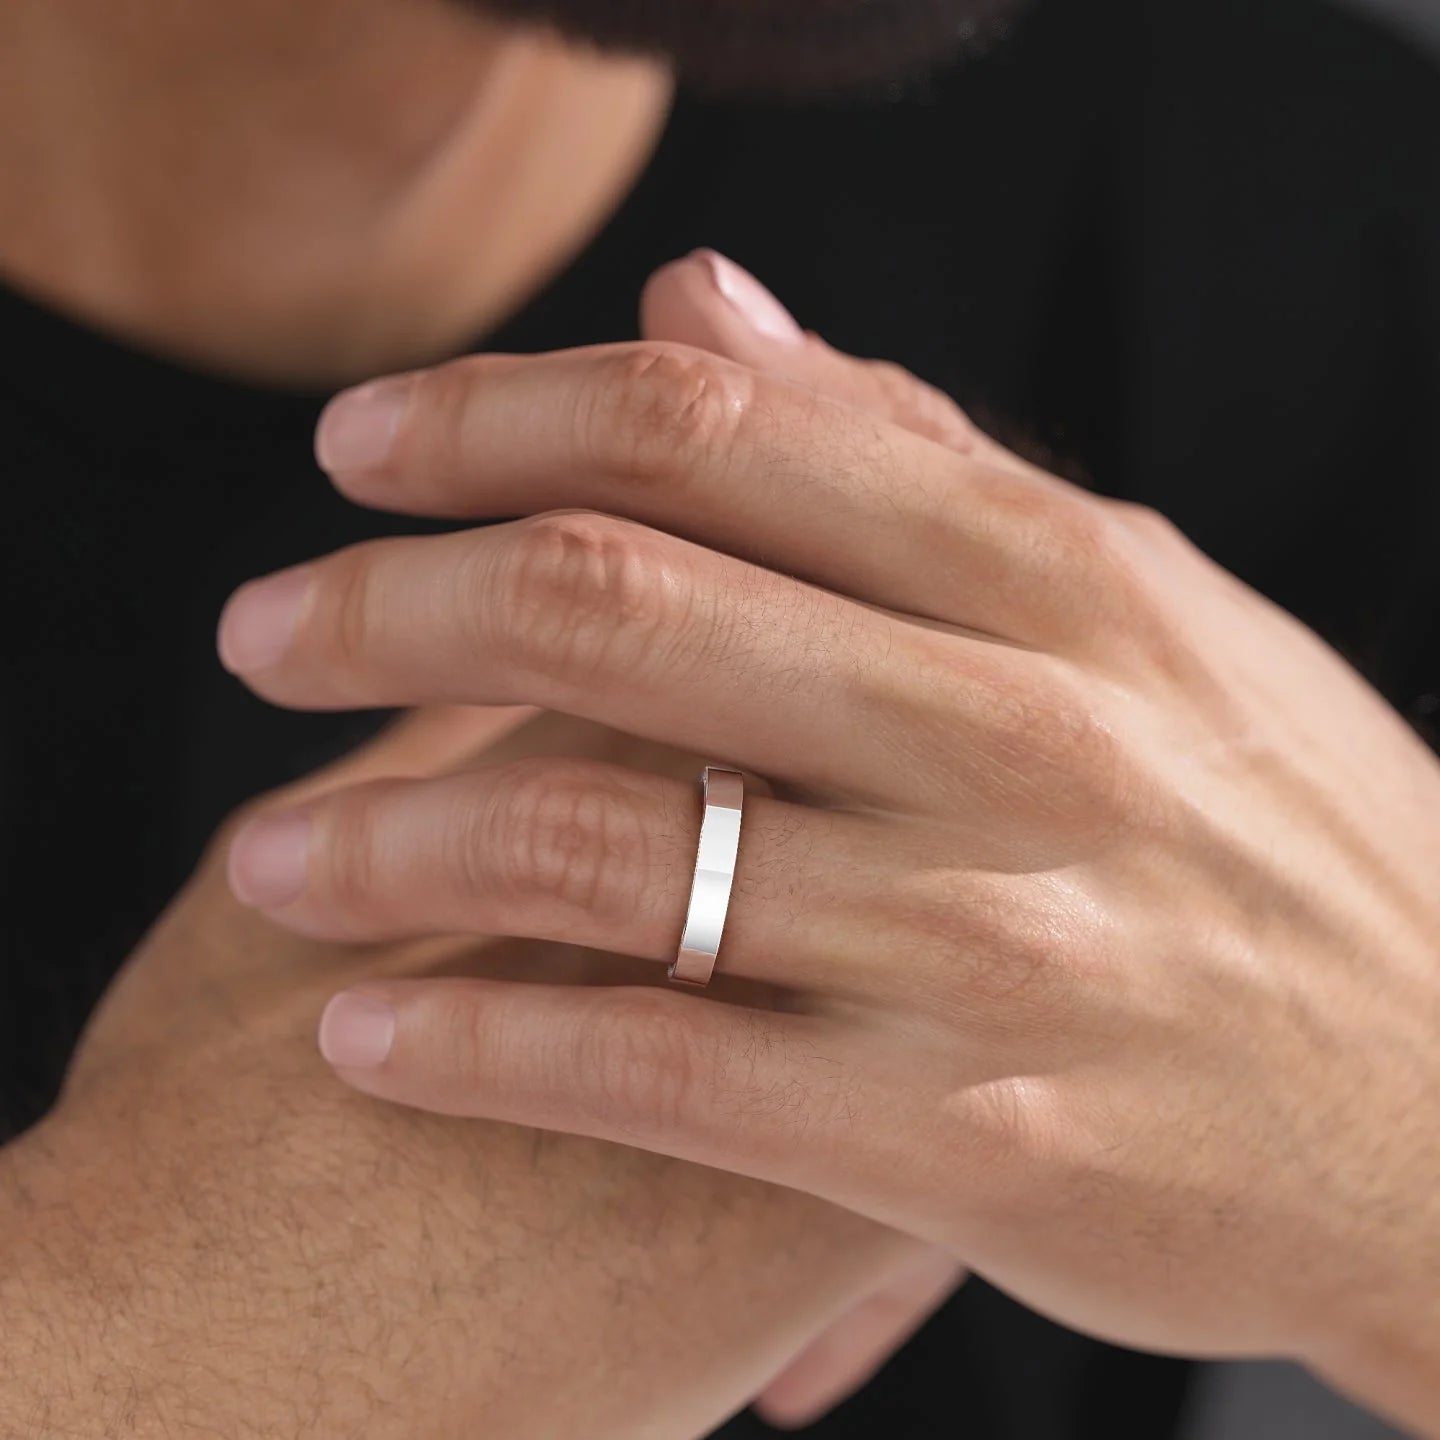 Which finger is it not annoying to wear a ring on all day? - Quora